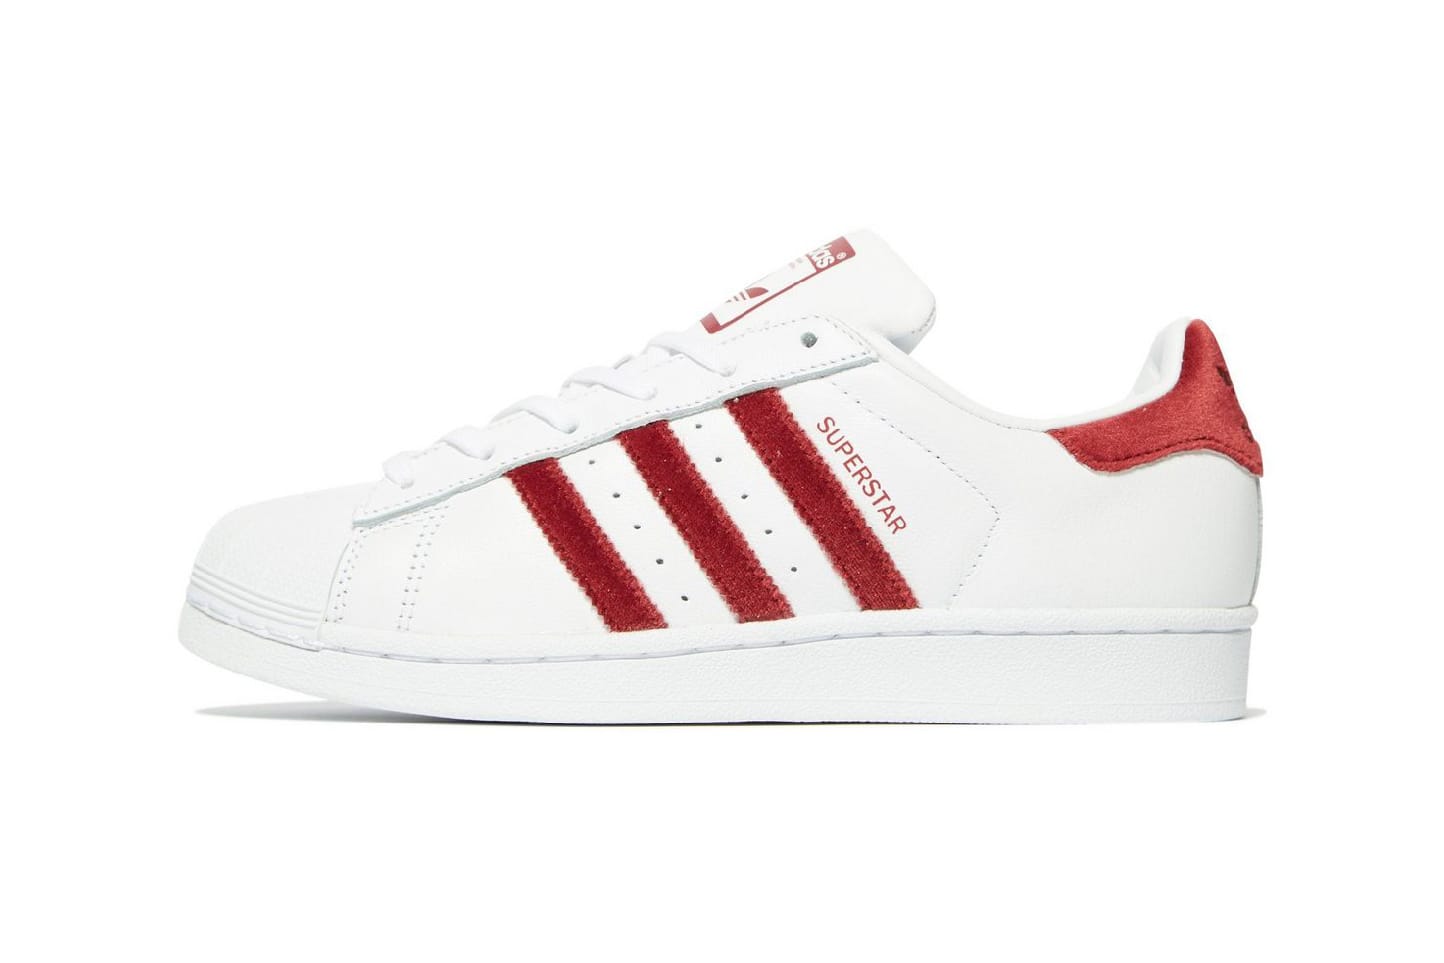 red and white shell toe adidas